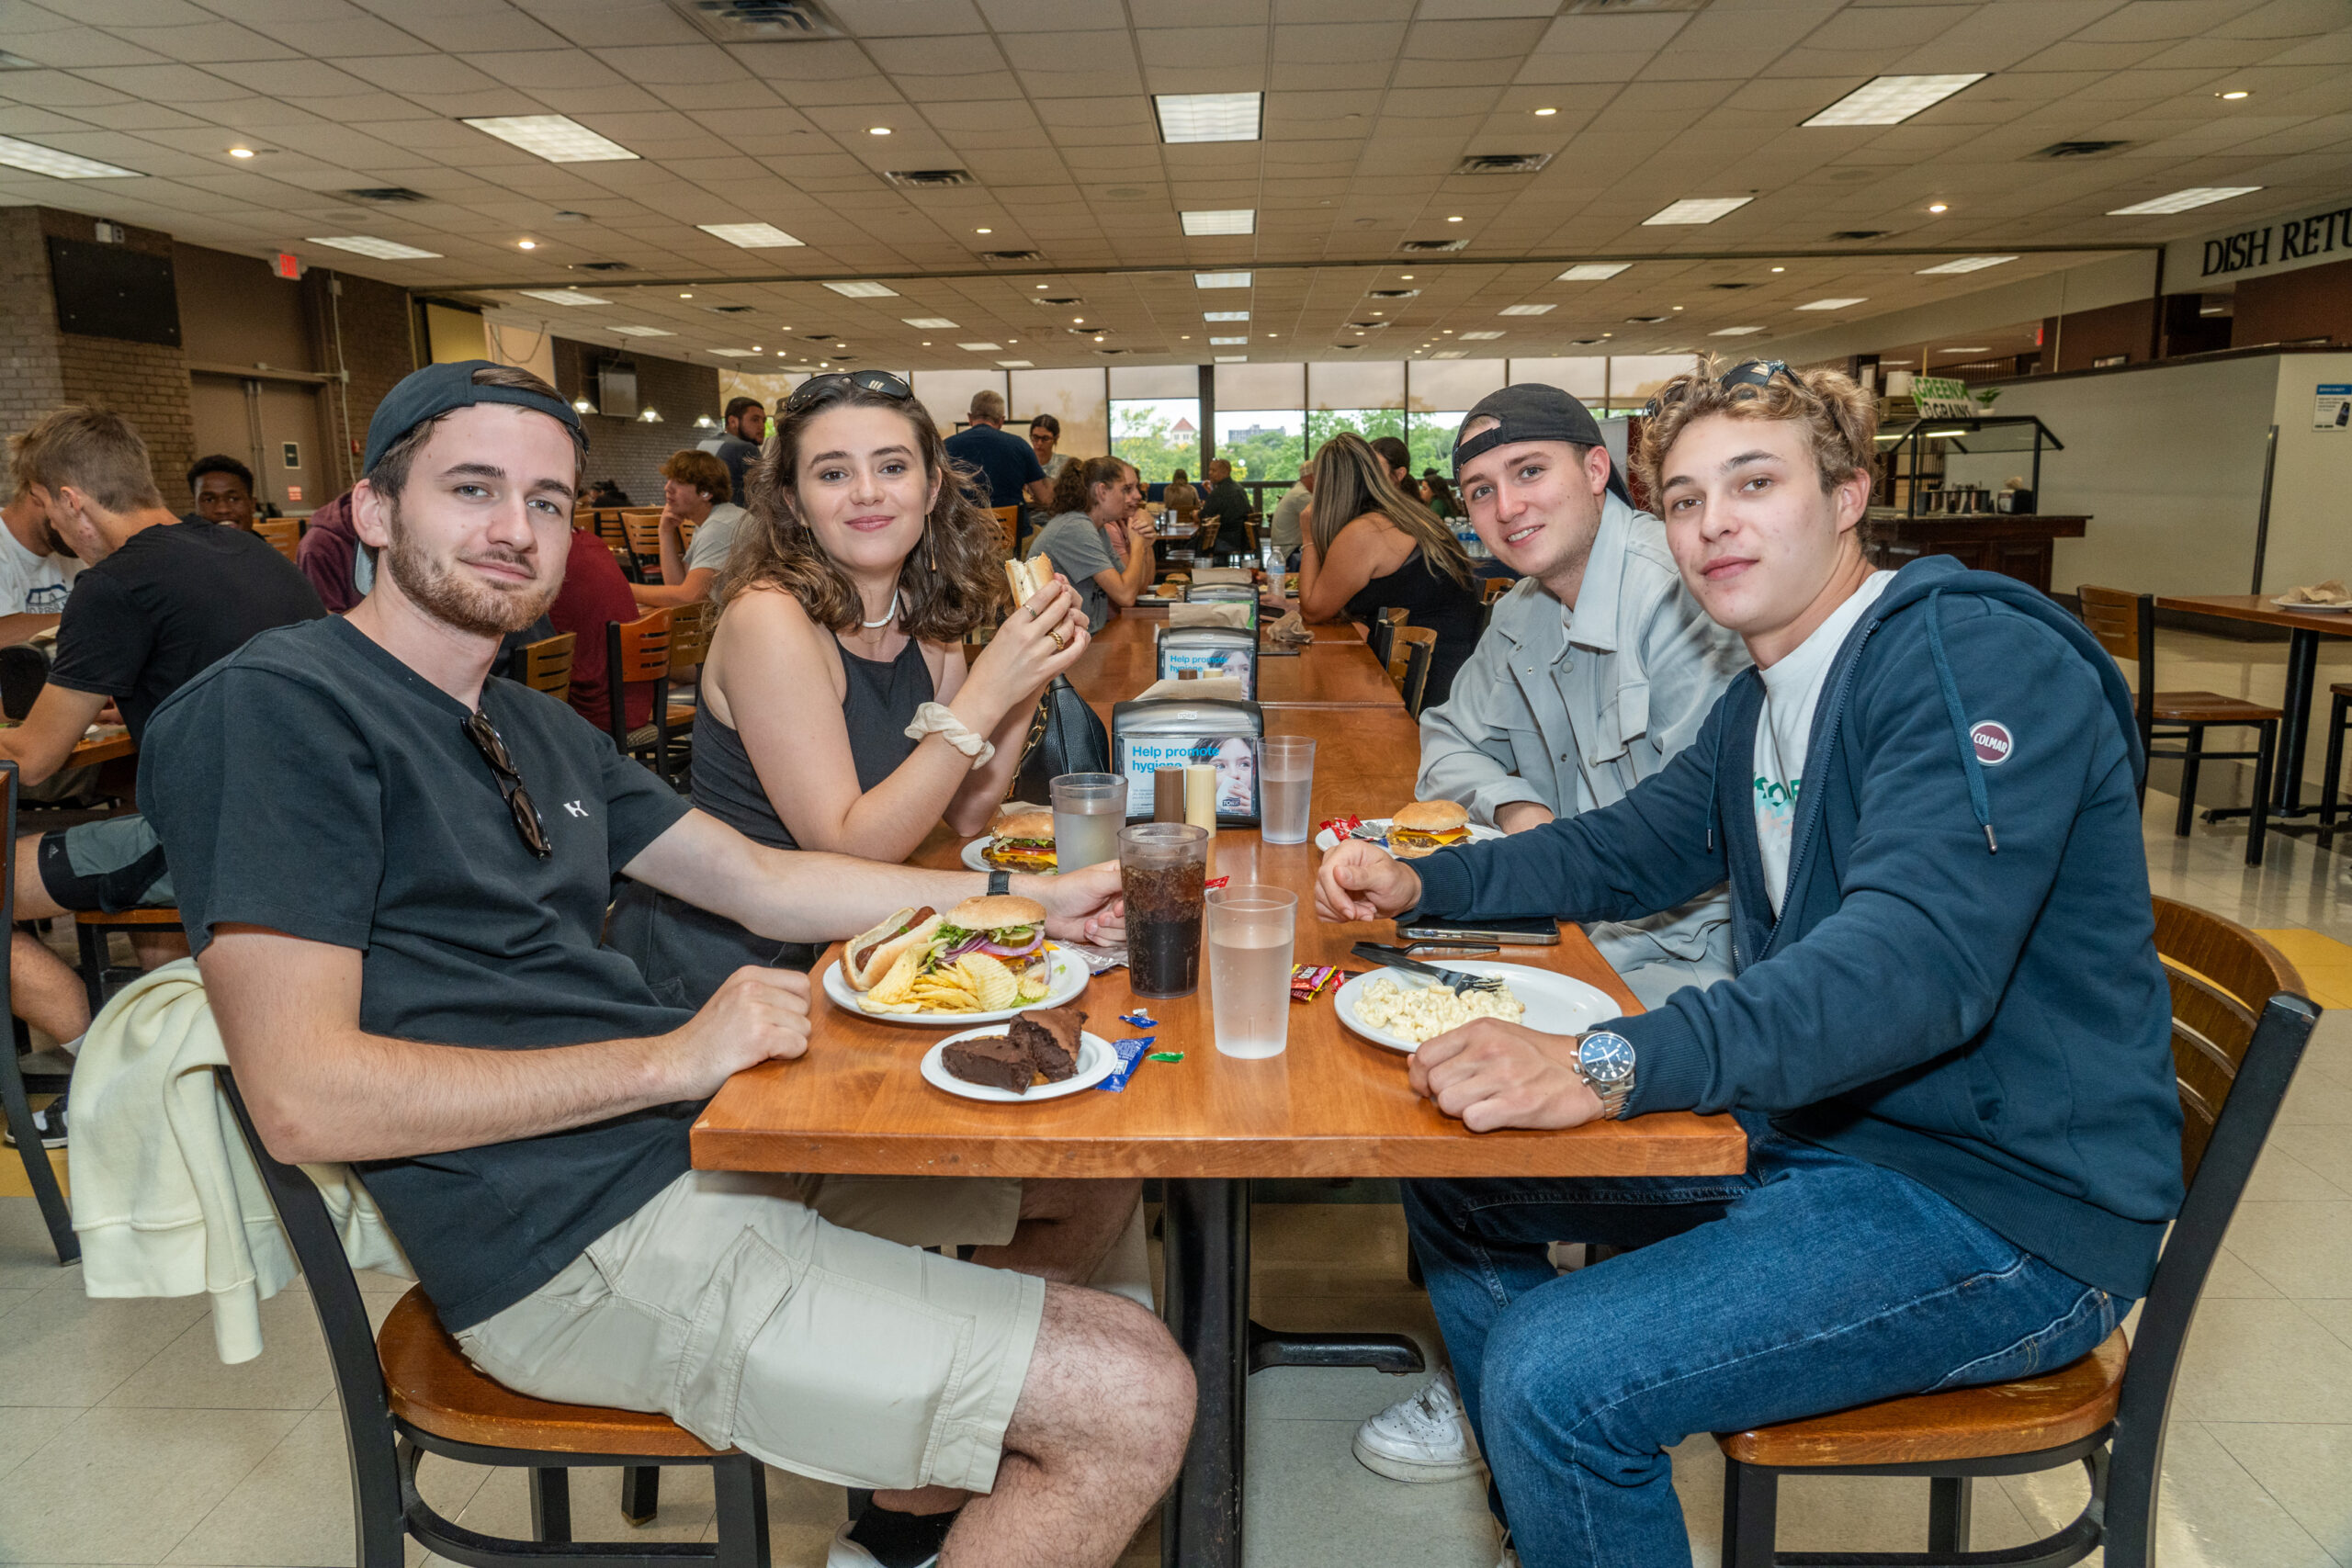 students eating at a dining hall table